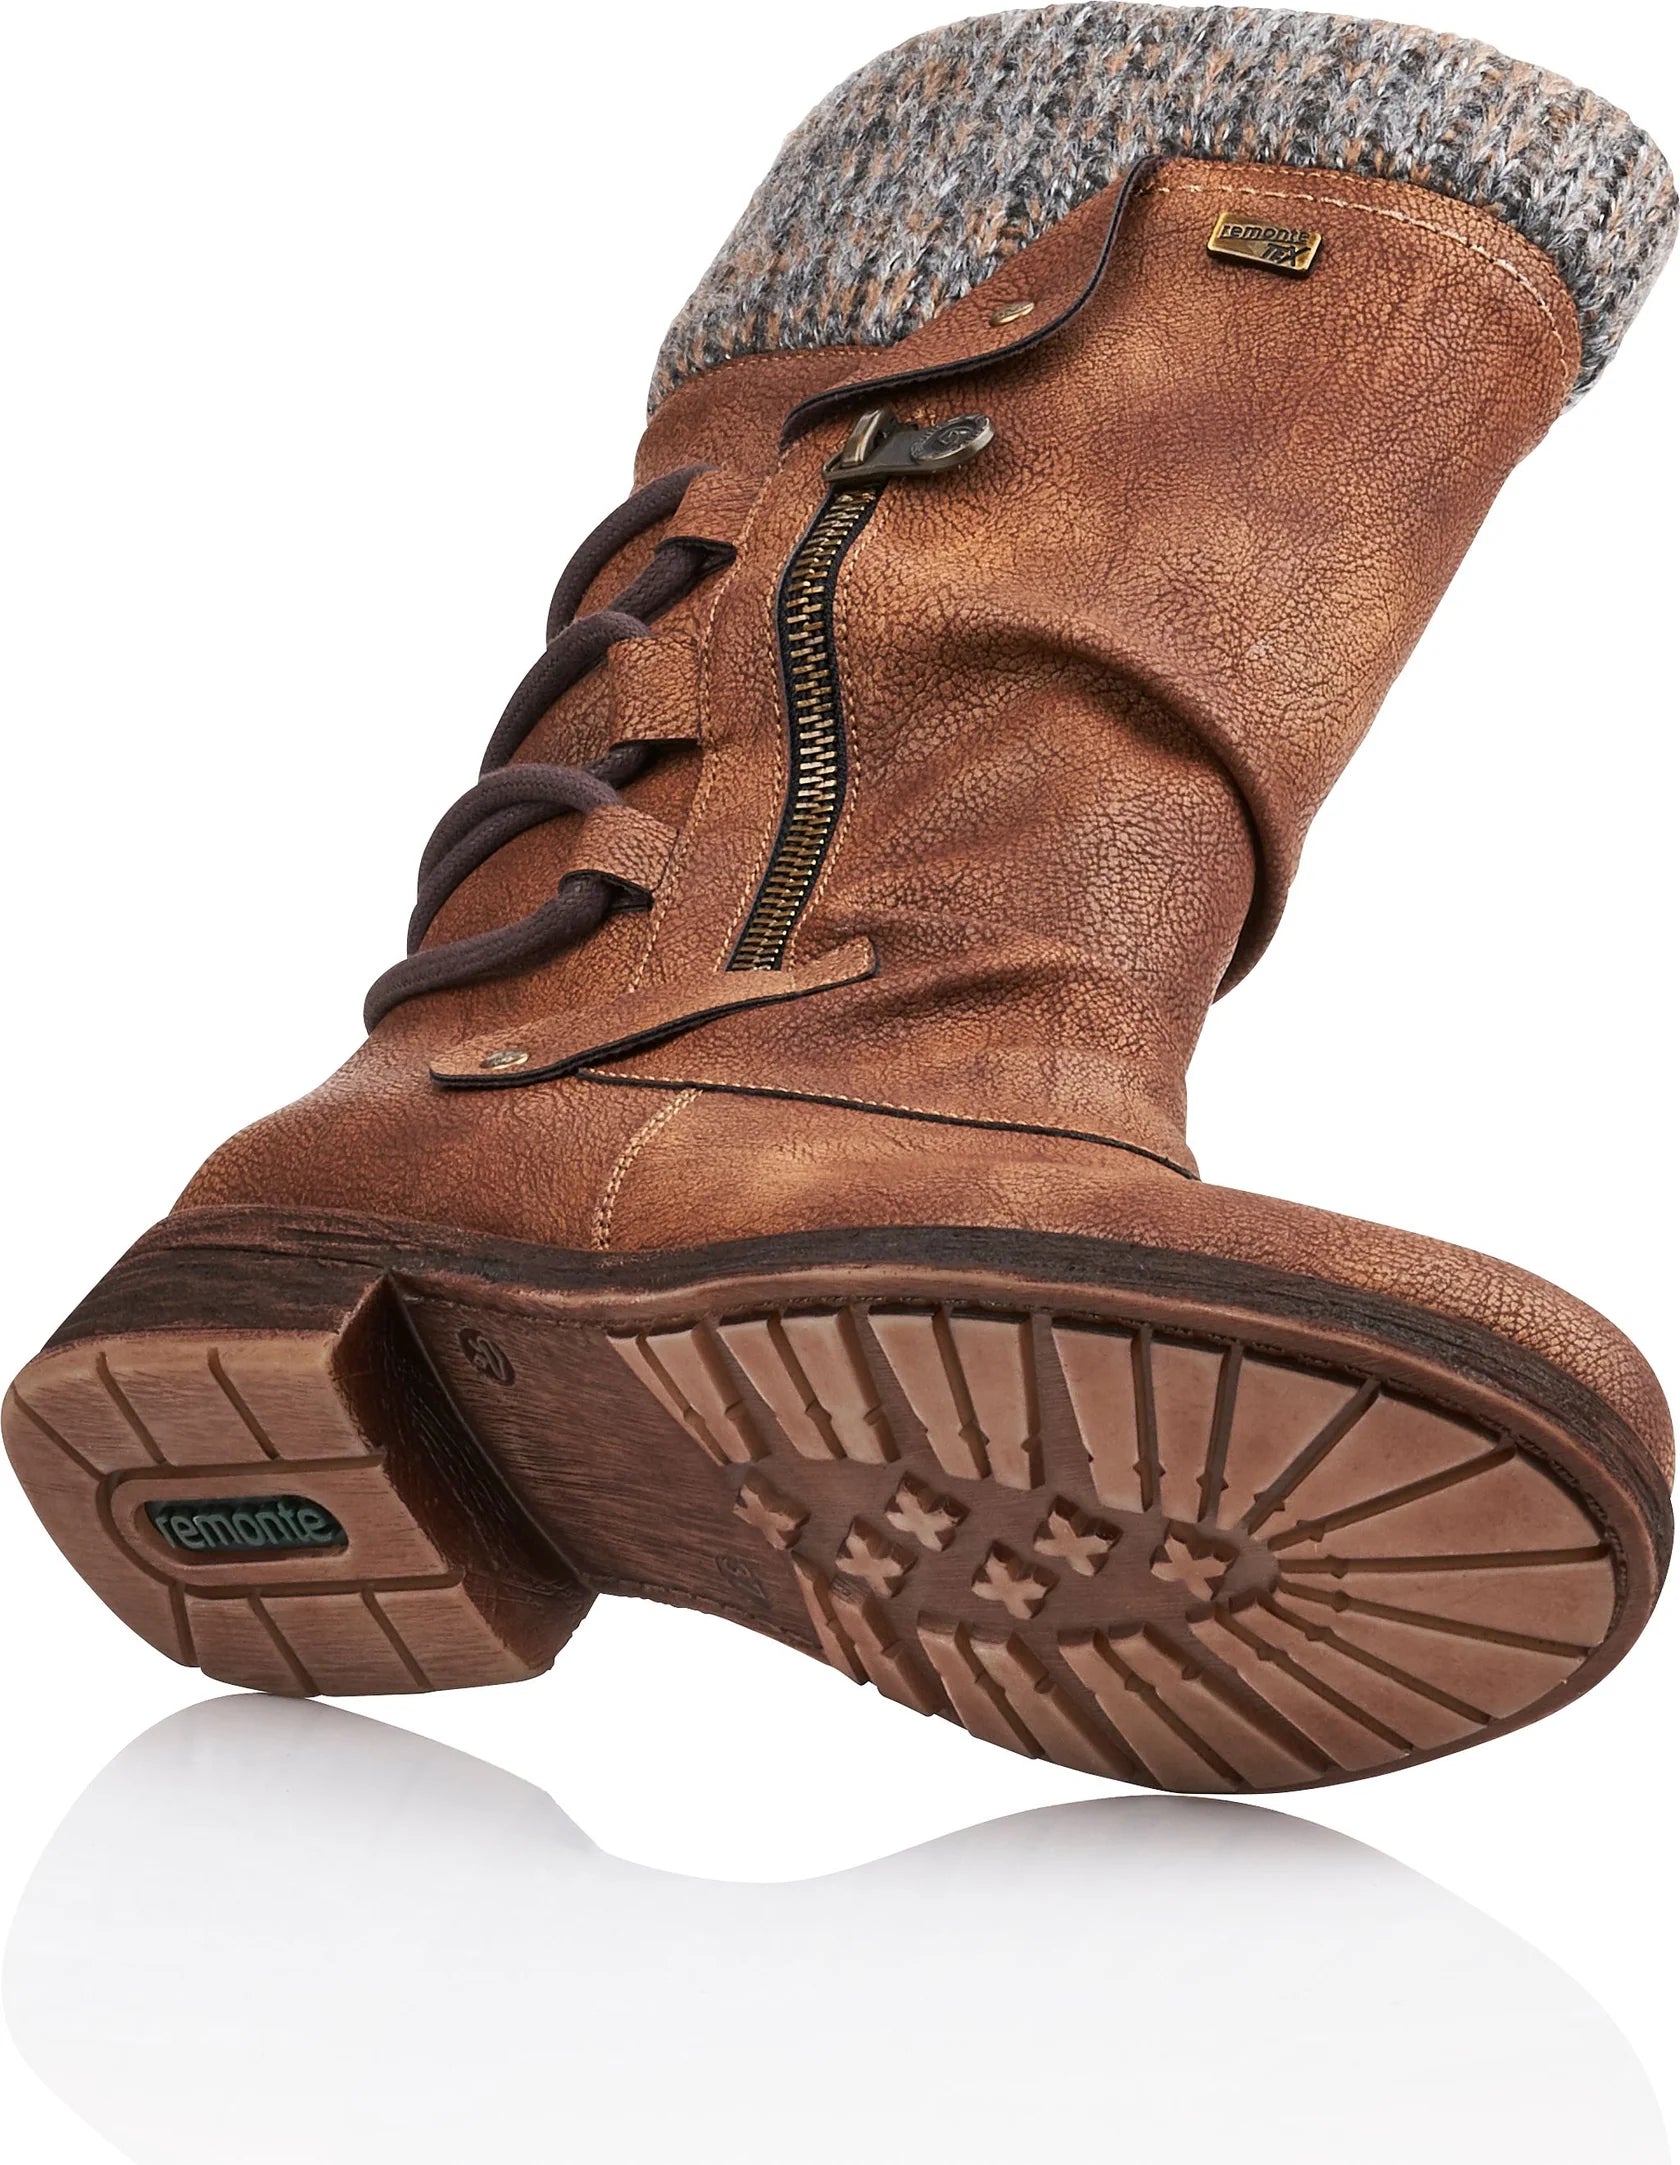 Remonte Women's D8070-25 Mid Boots Brown